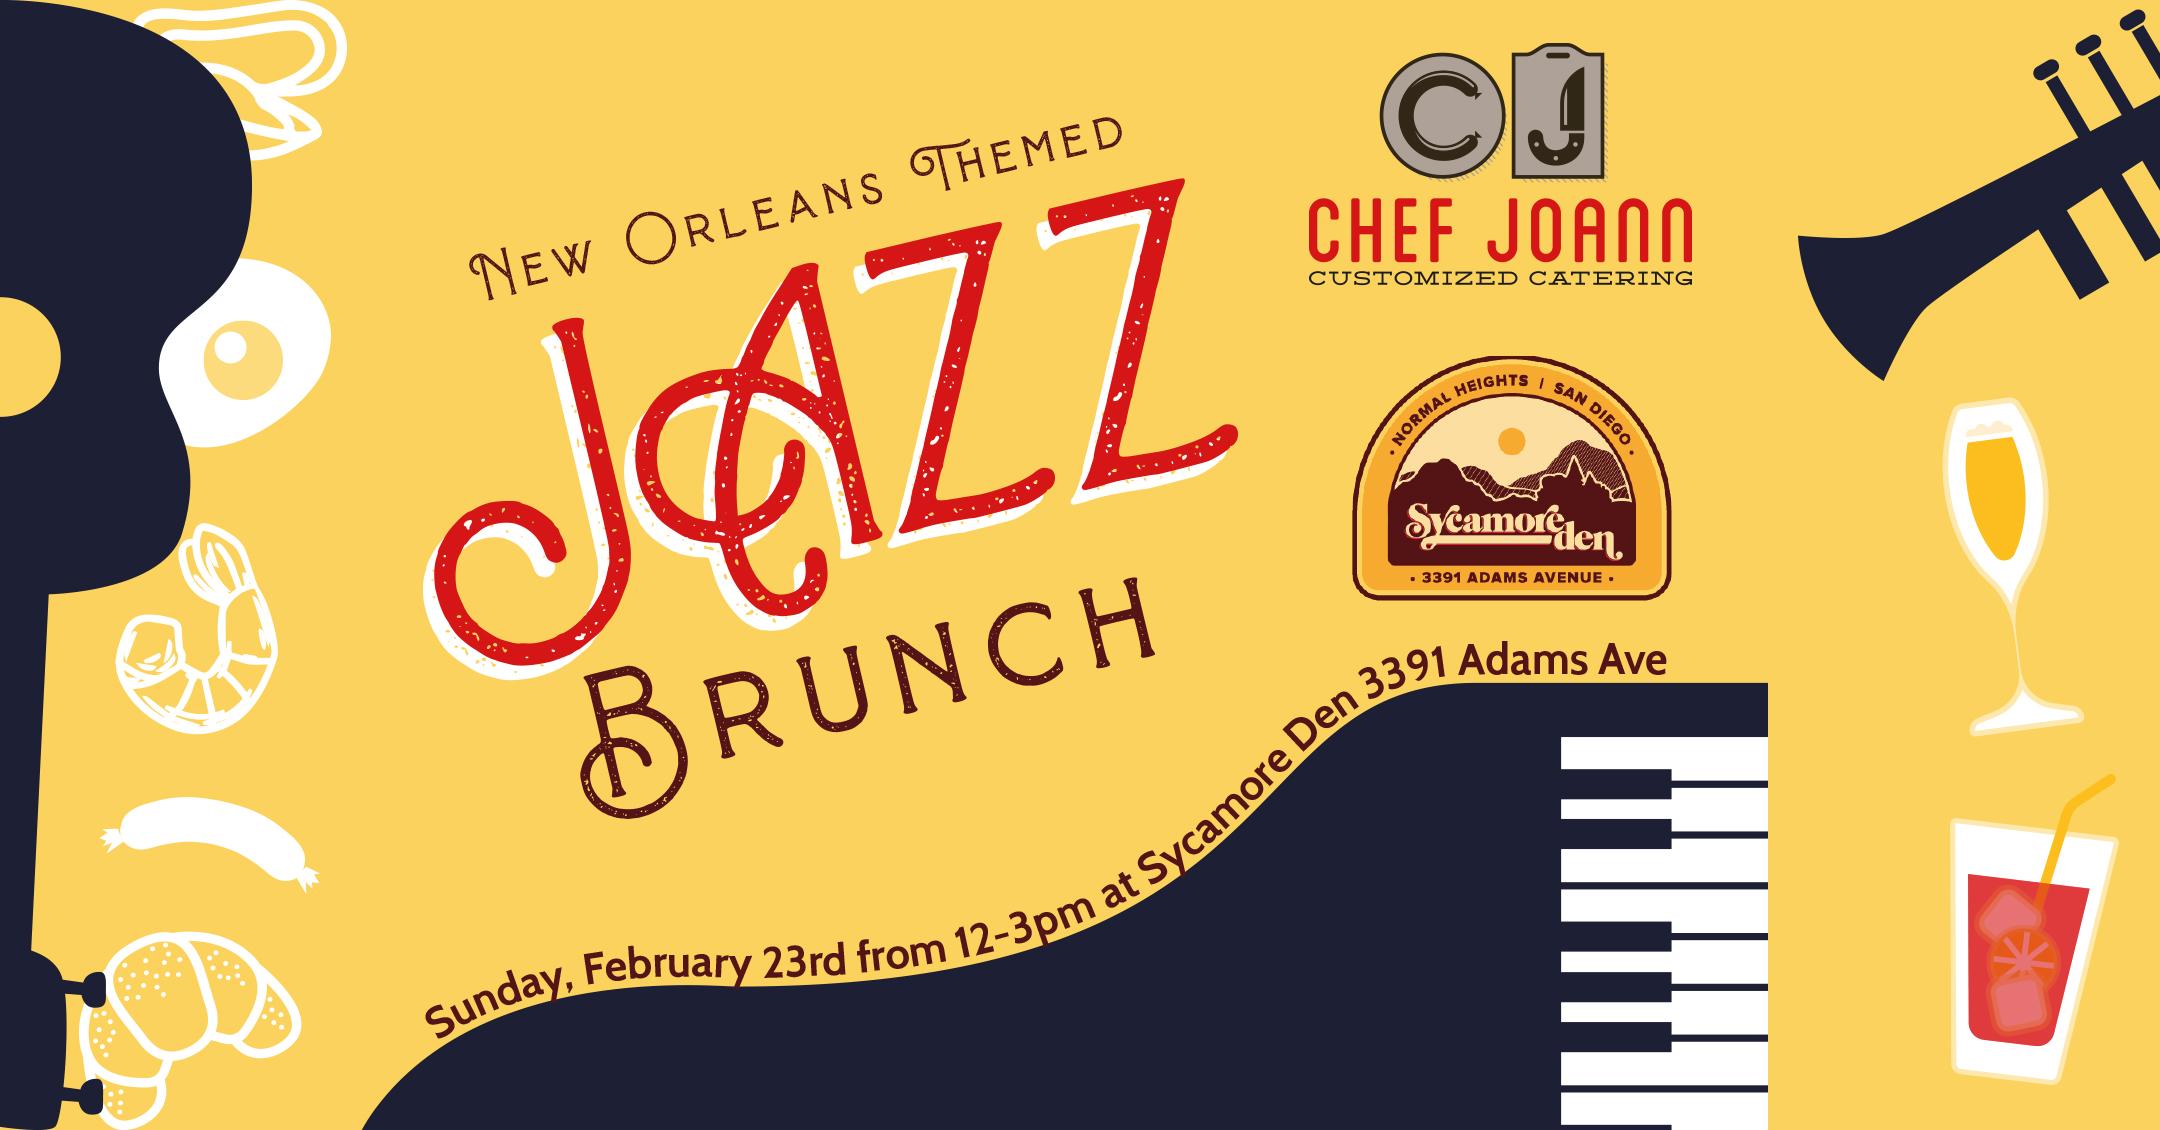 New Orleans Themed Jazz Brunch